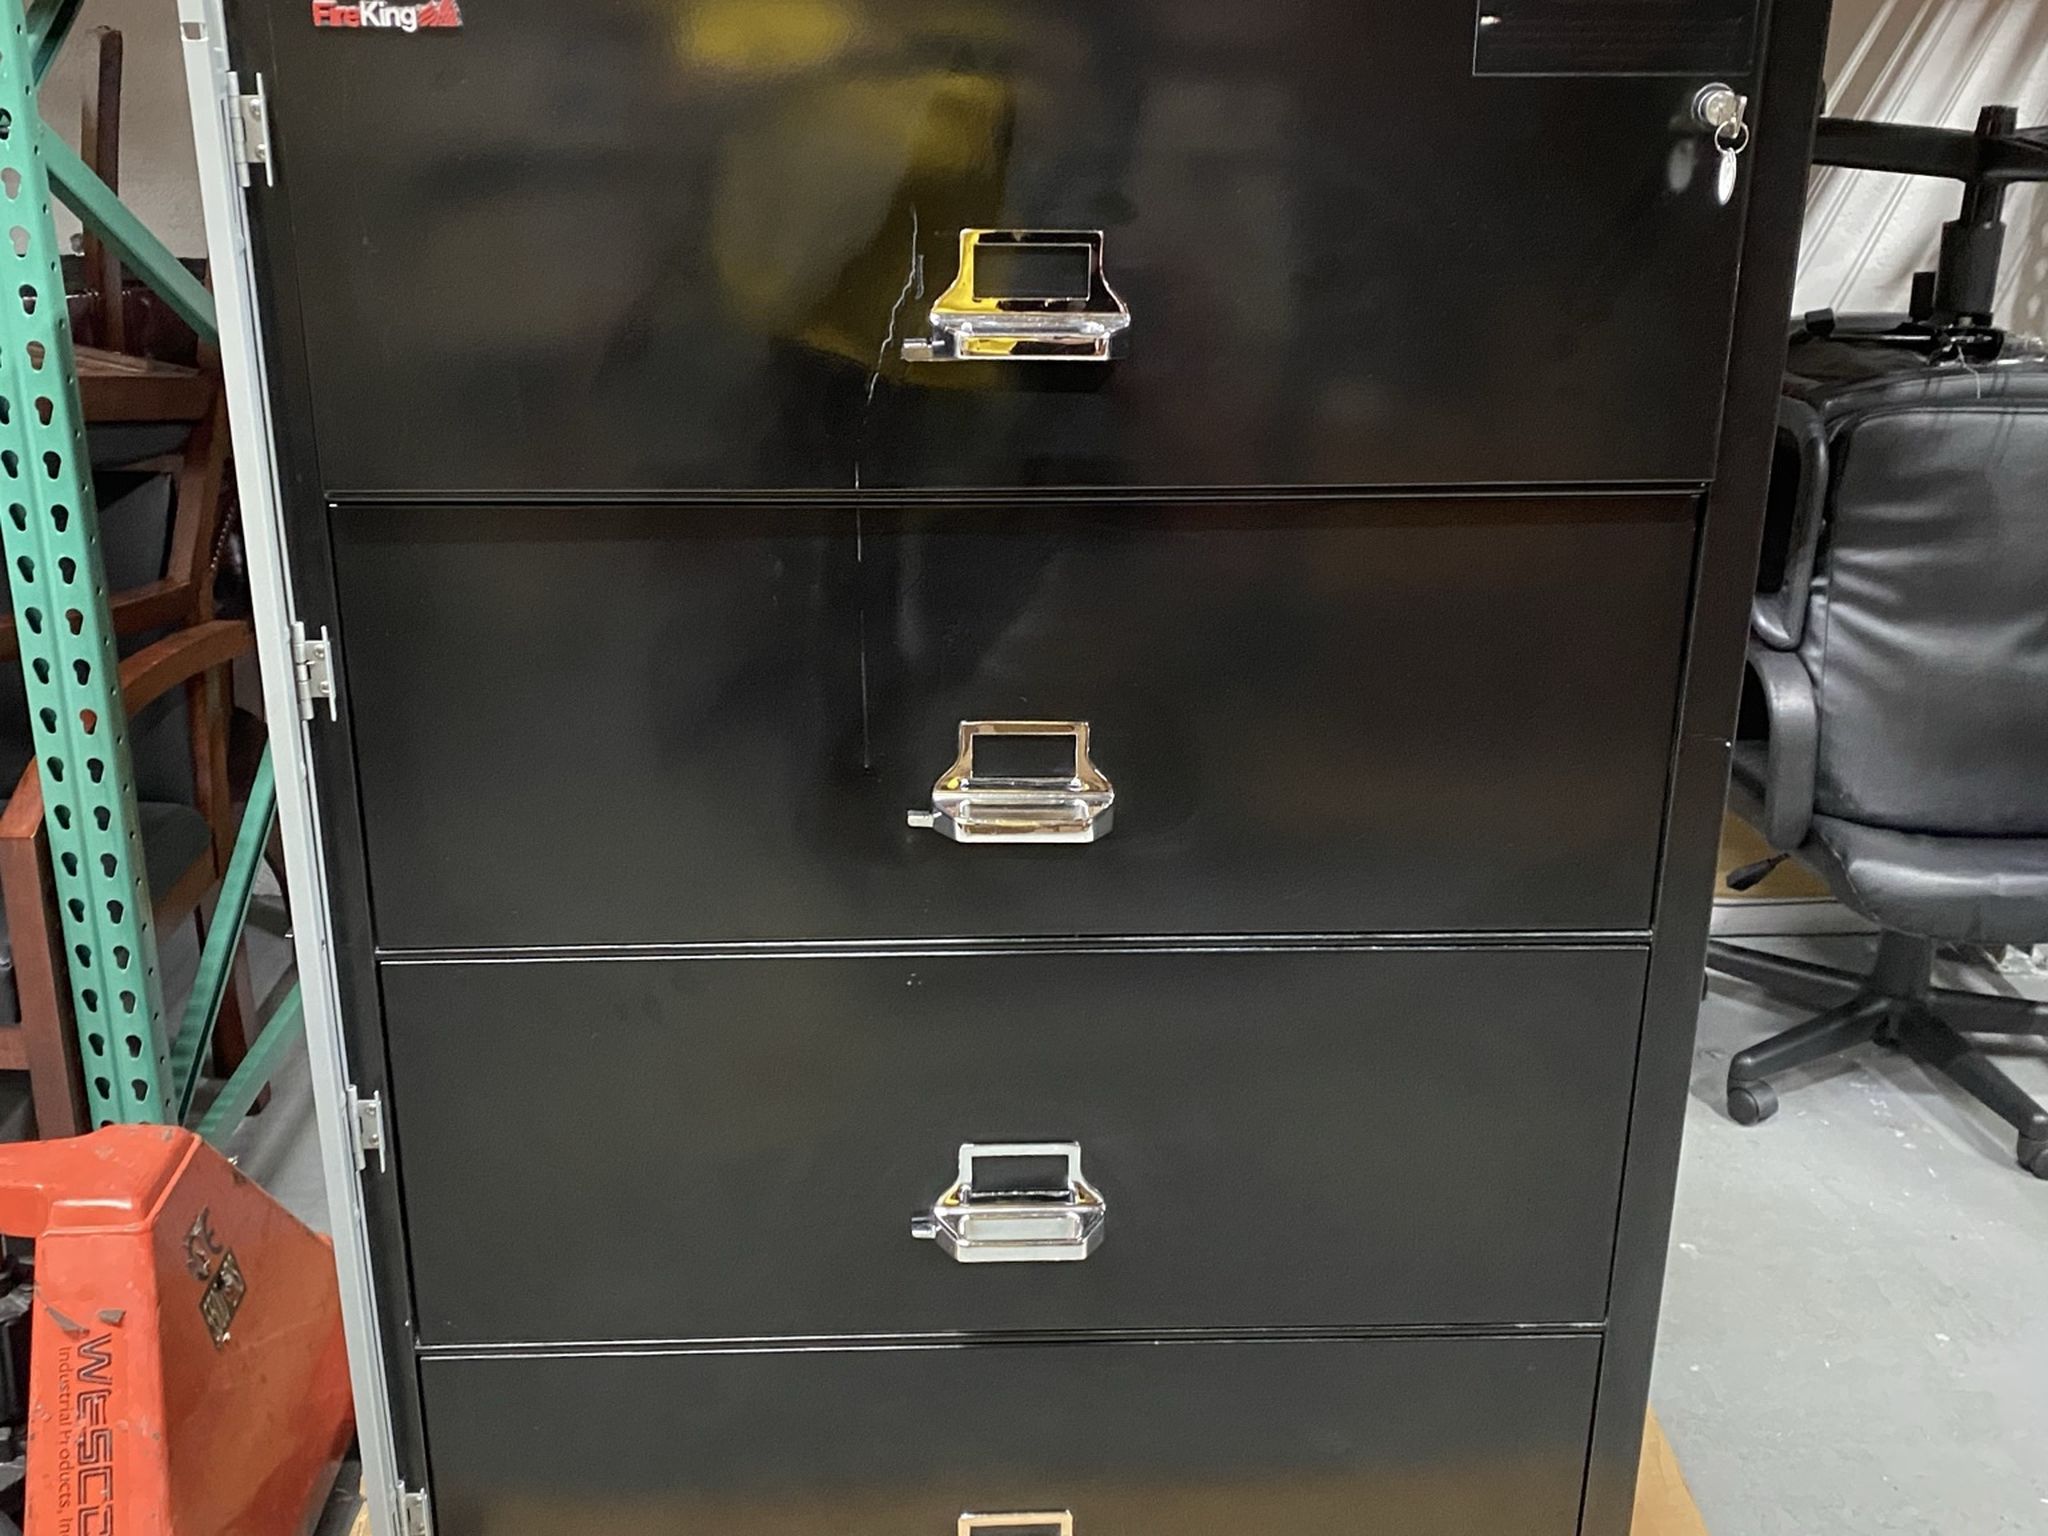 Fireproof file cabinets by FireKing 900 lbs 38” 4 Drawer lock & Key MEDECO good for documents and valuables, more than a SAFE